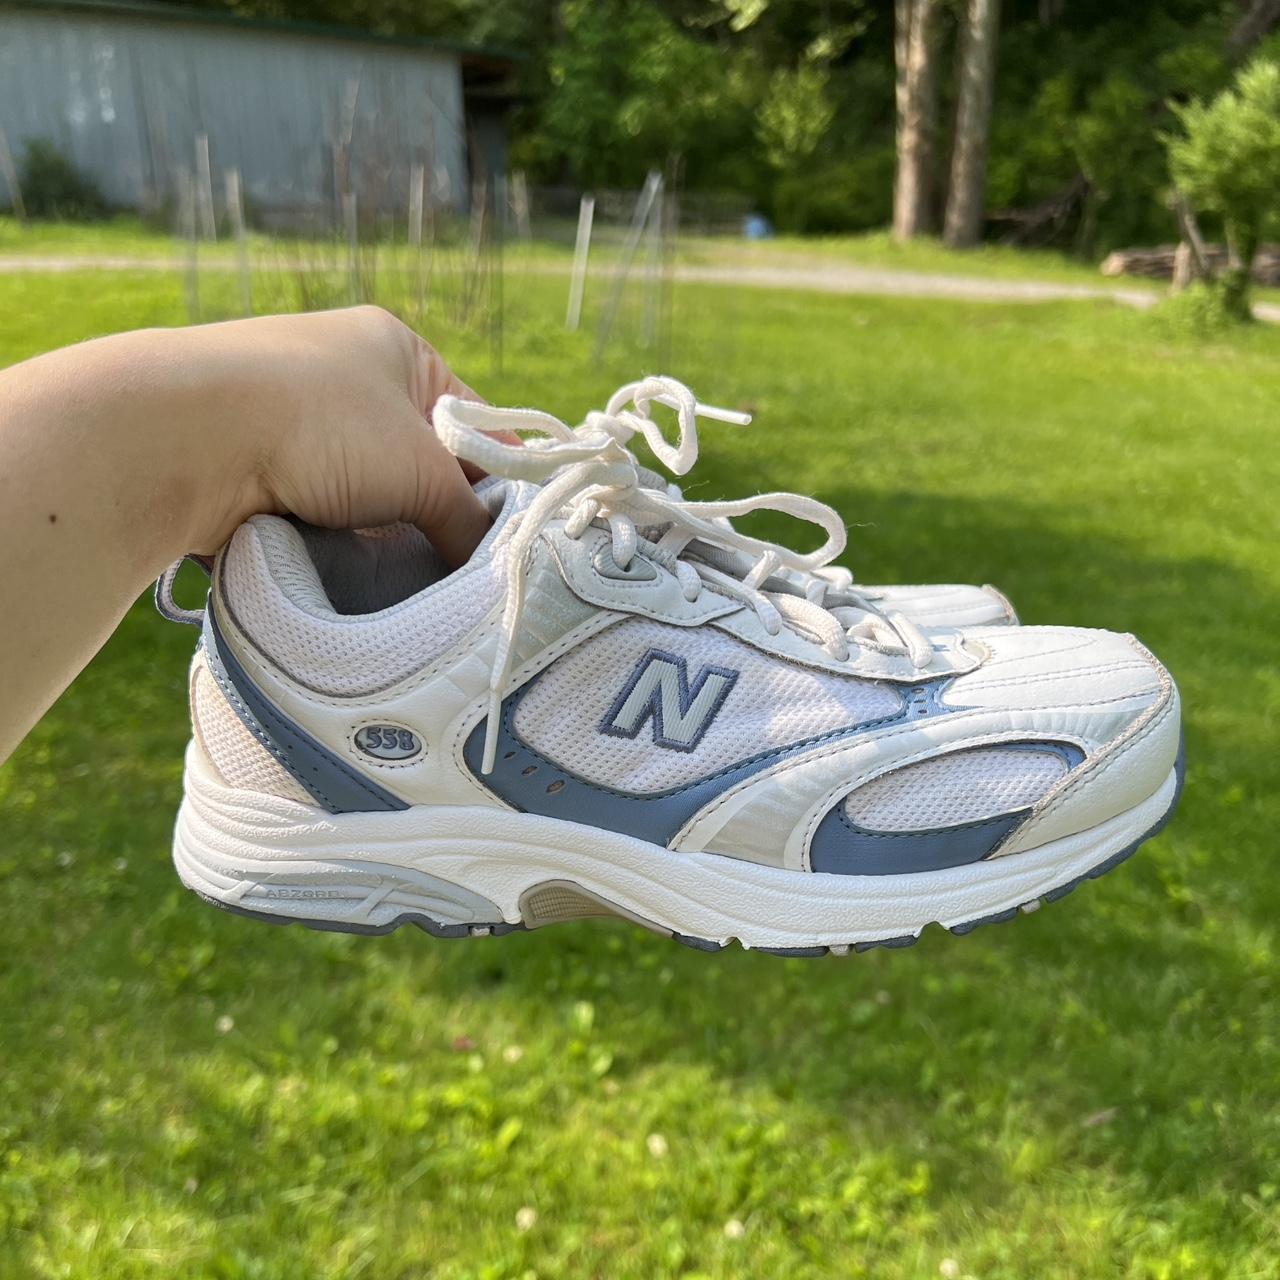 New Balance Women's White and Blue Trainers | Depop